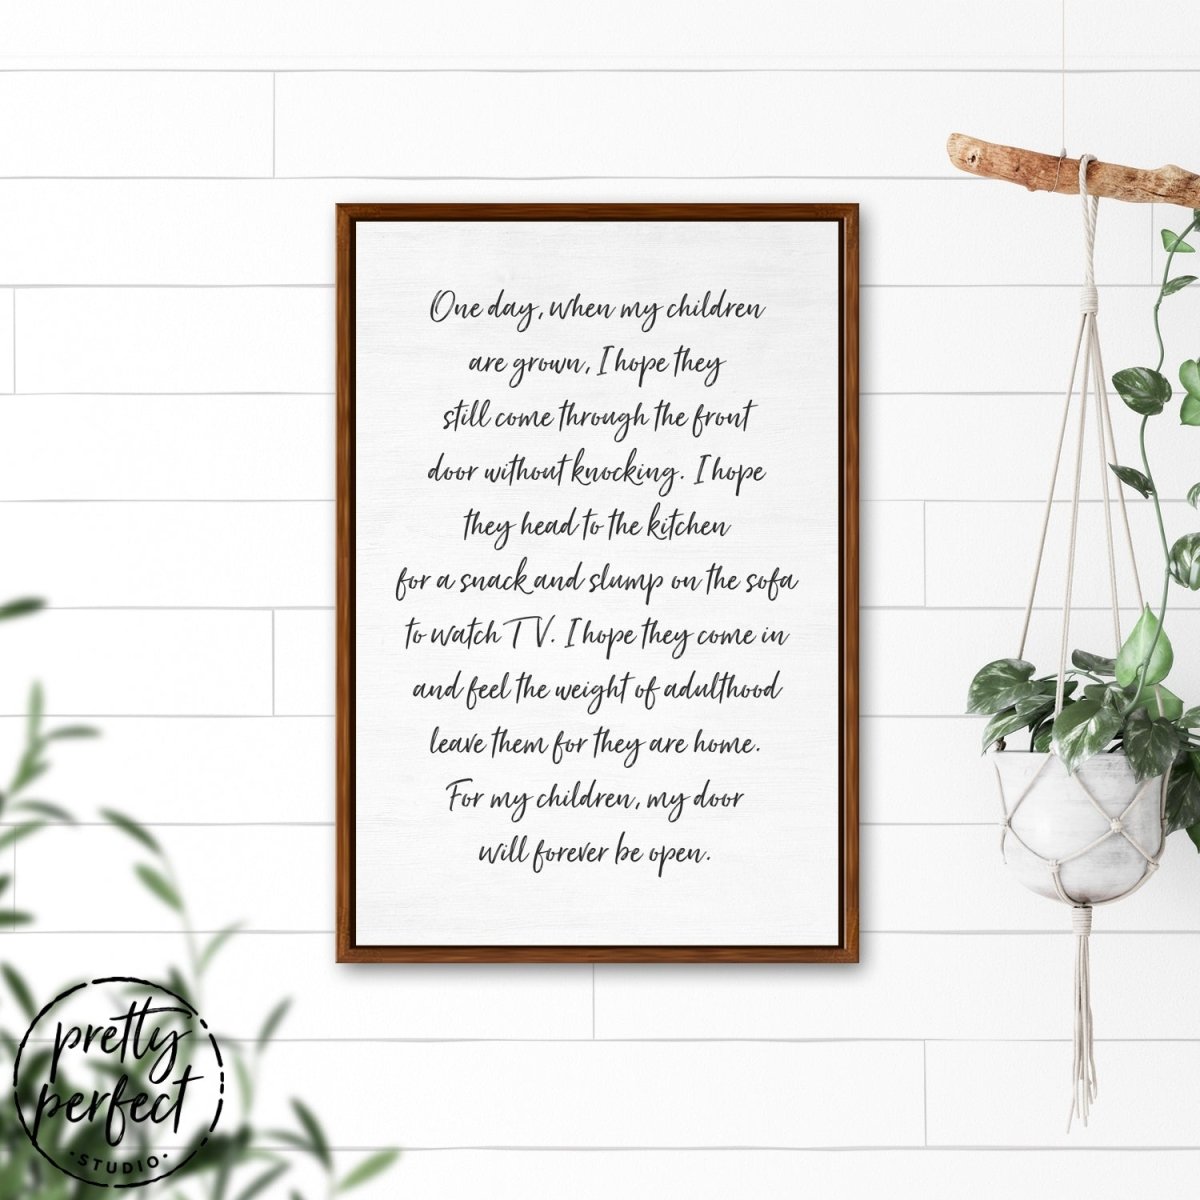 One Day When My Children Are Grown Canvas Sign Hanging in Entryway of Home - Pretty Perfect Studio